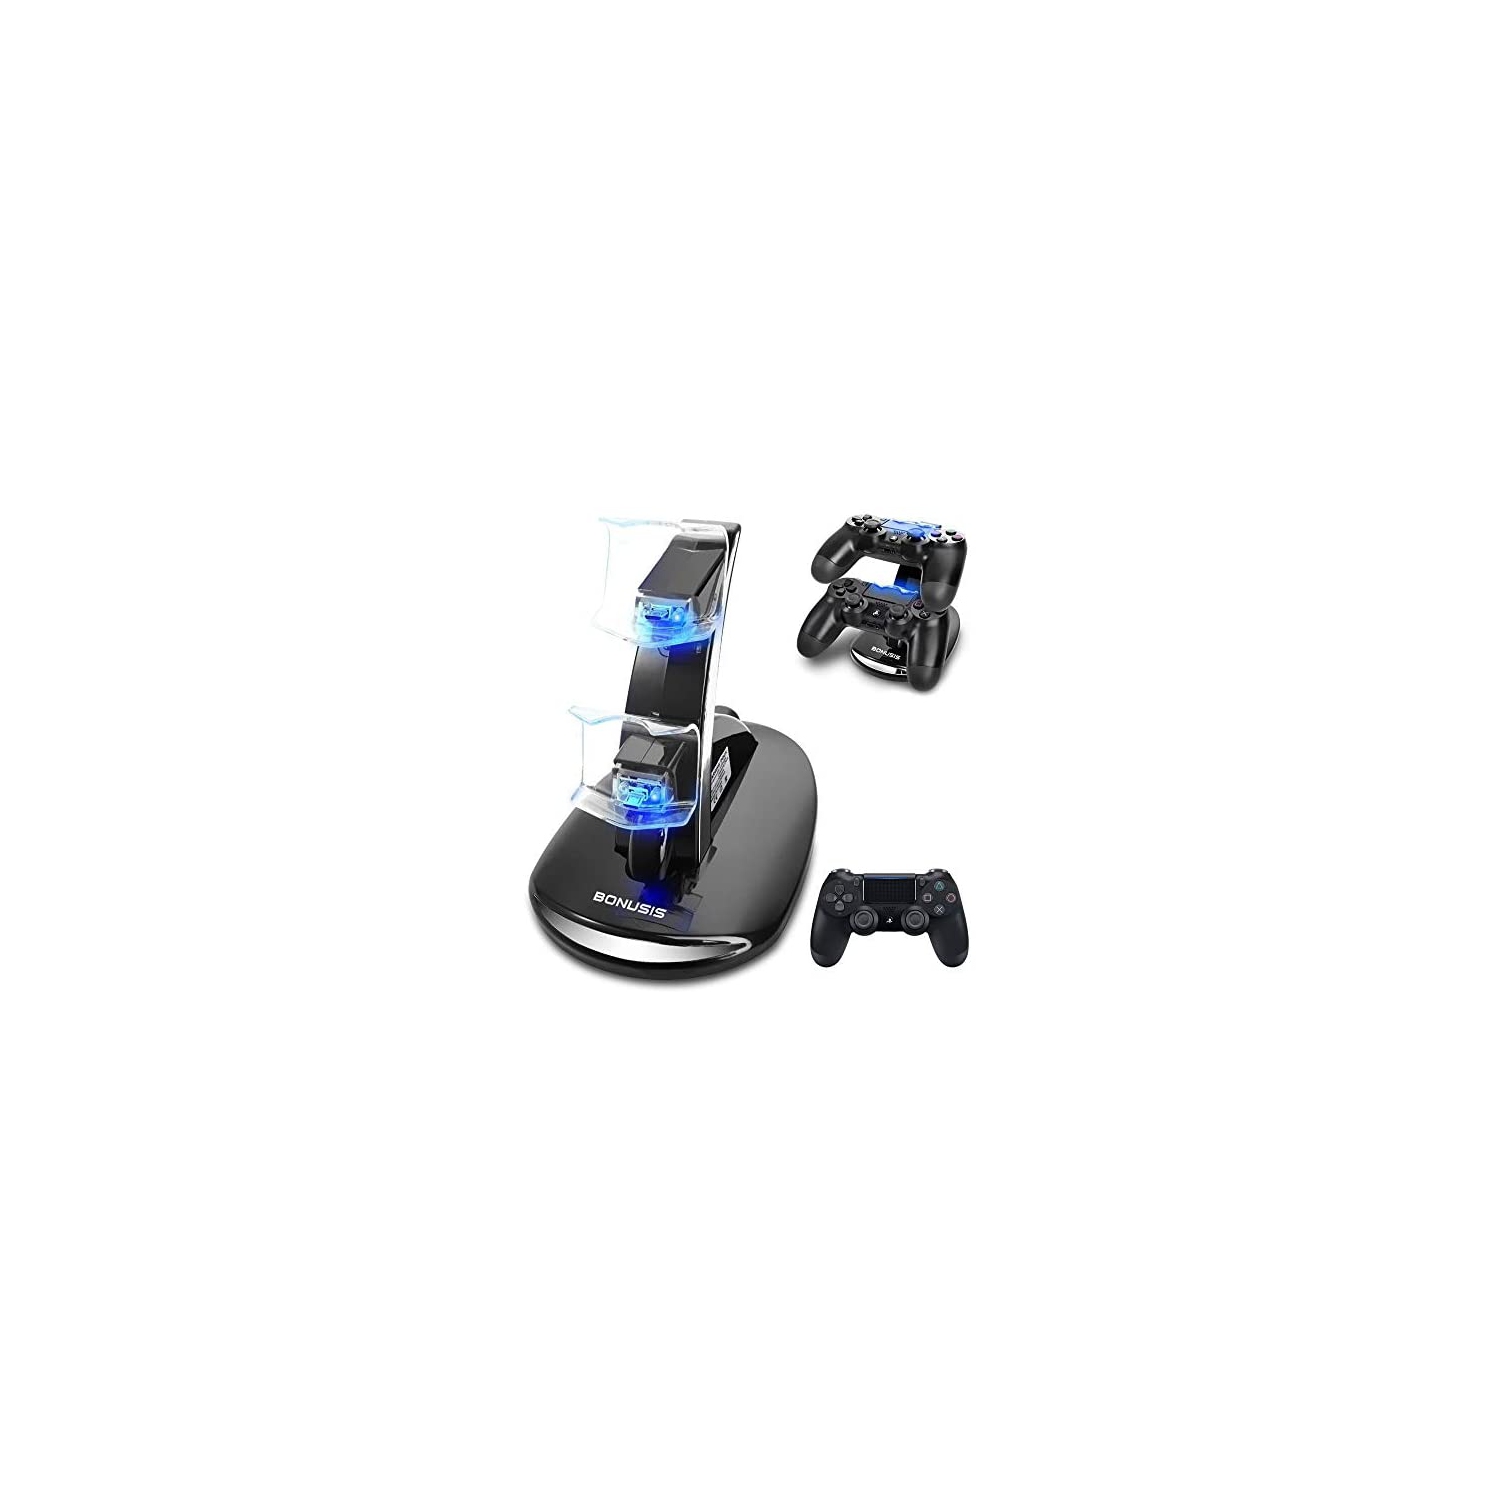 BONUSIS PS4 Controller -Dual USB Simultaneous Charger / Charging Dock Cradle Stand Accessory for Sony PS4 Control